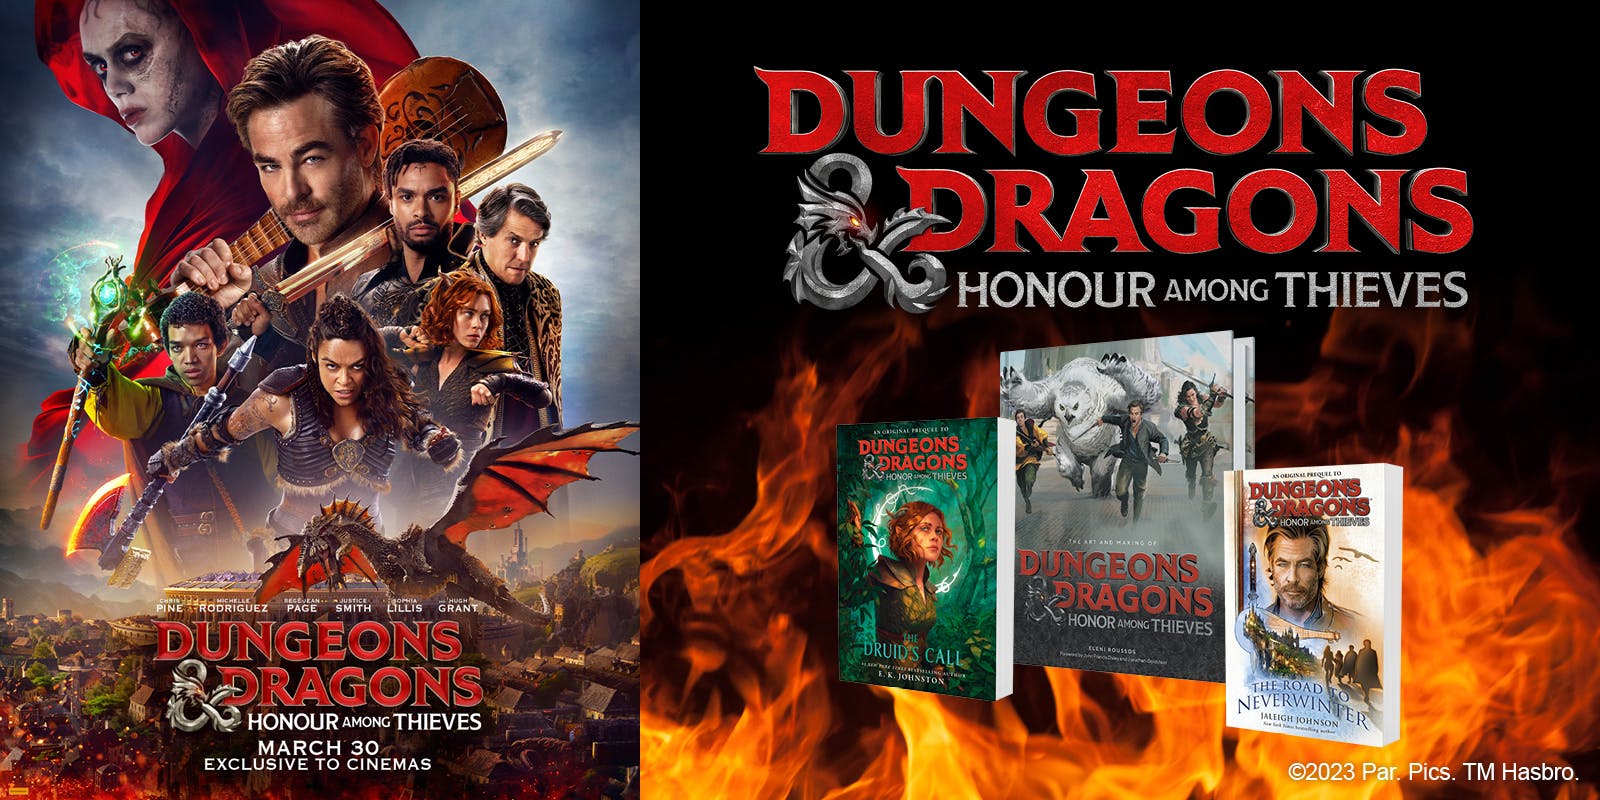 10 Books to Read Instead of Watching the Dungeons & Dragons Movie